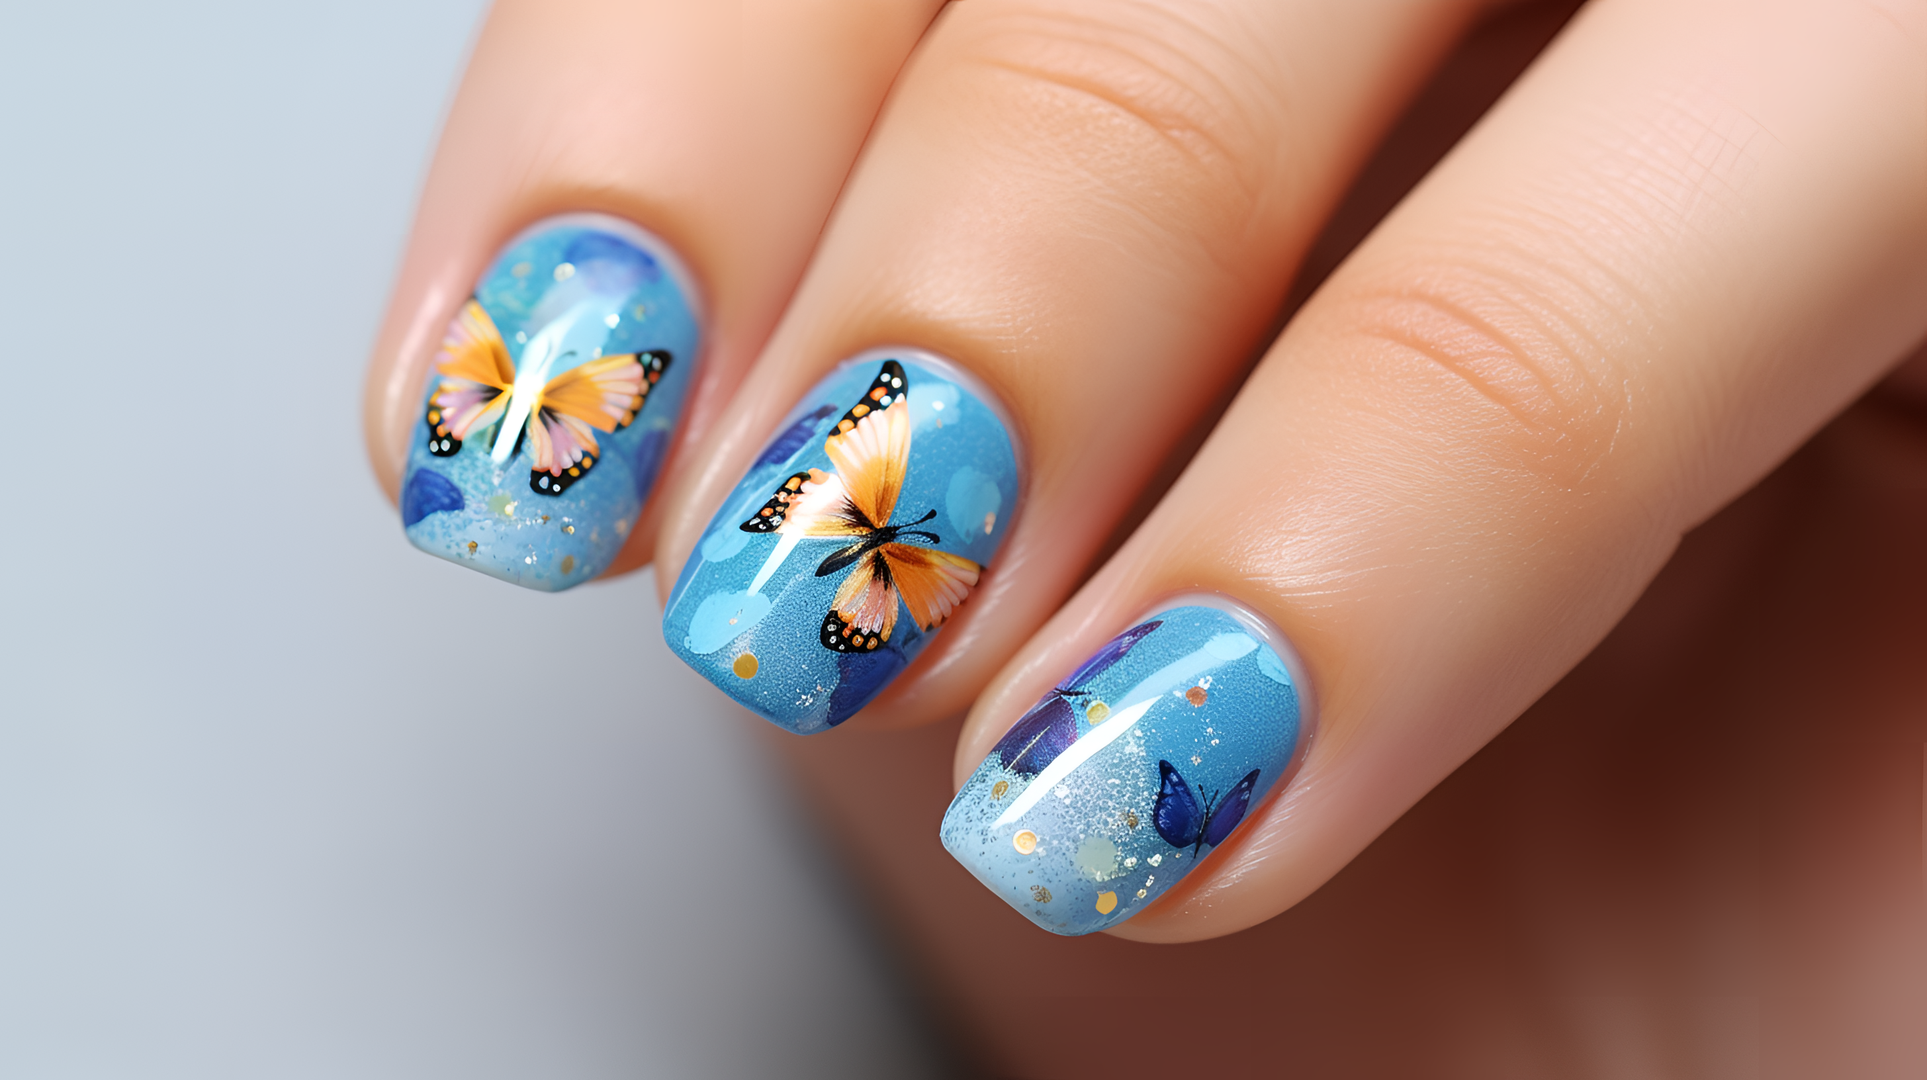 DIY Monarch Butterfly Nail Art - DIY Projects for Teens